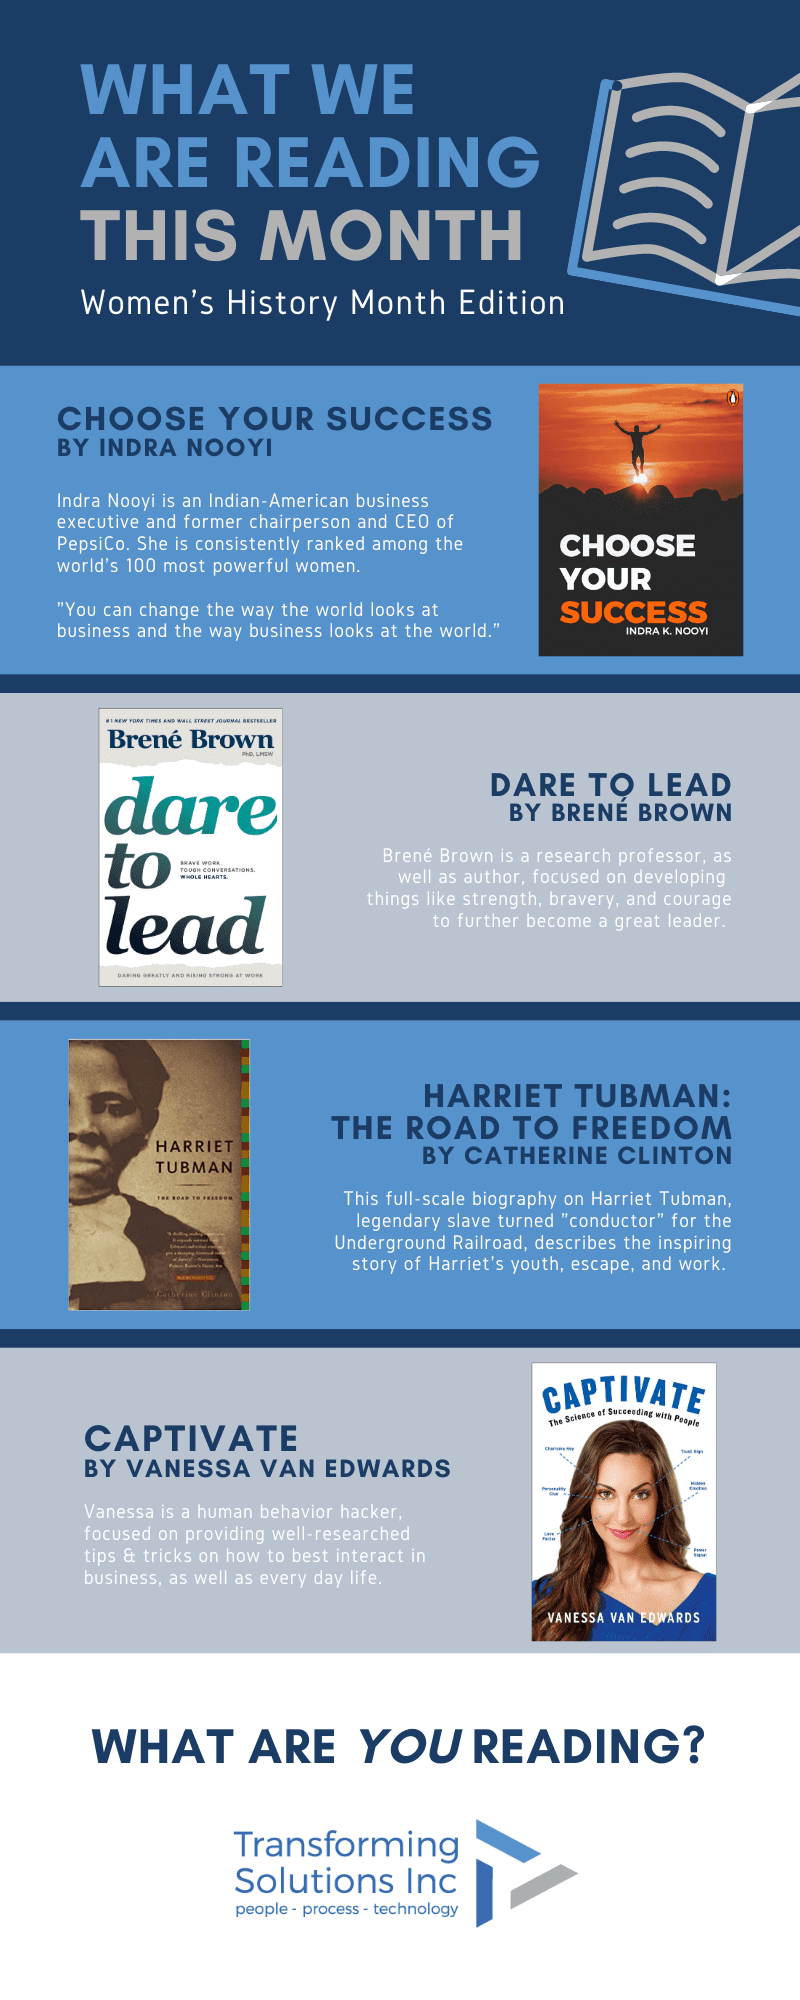 Infographic of our March reading list for women's history month